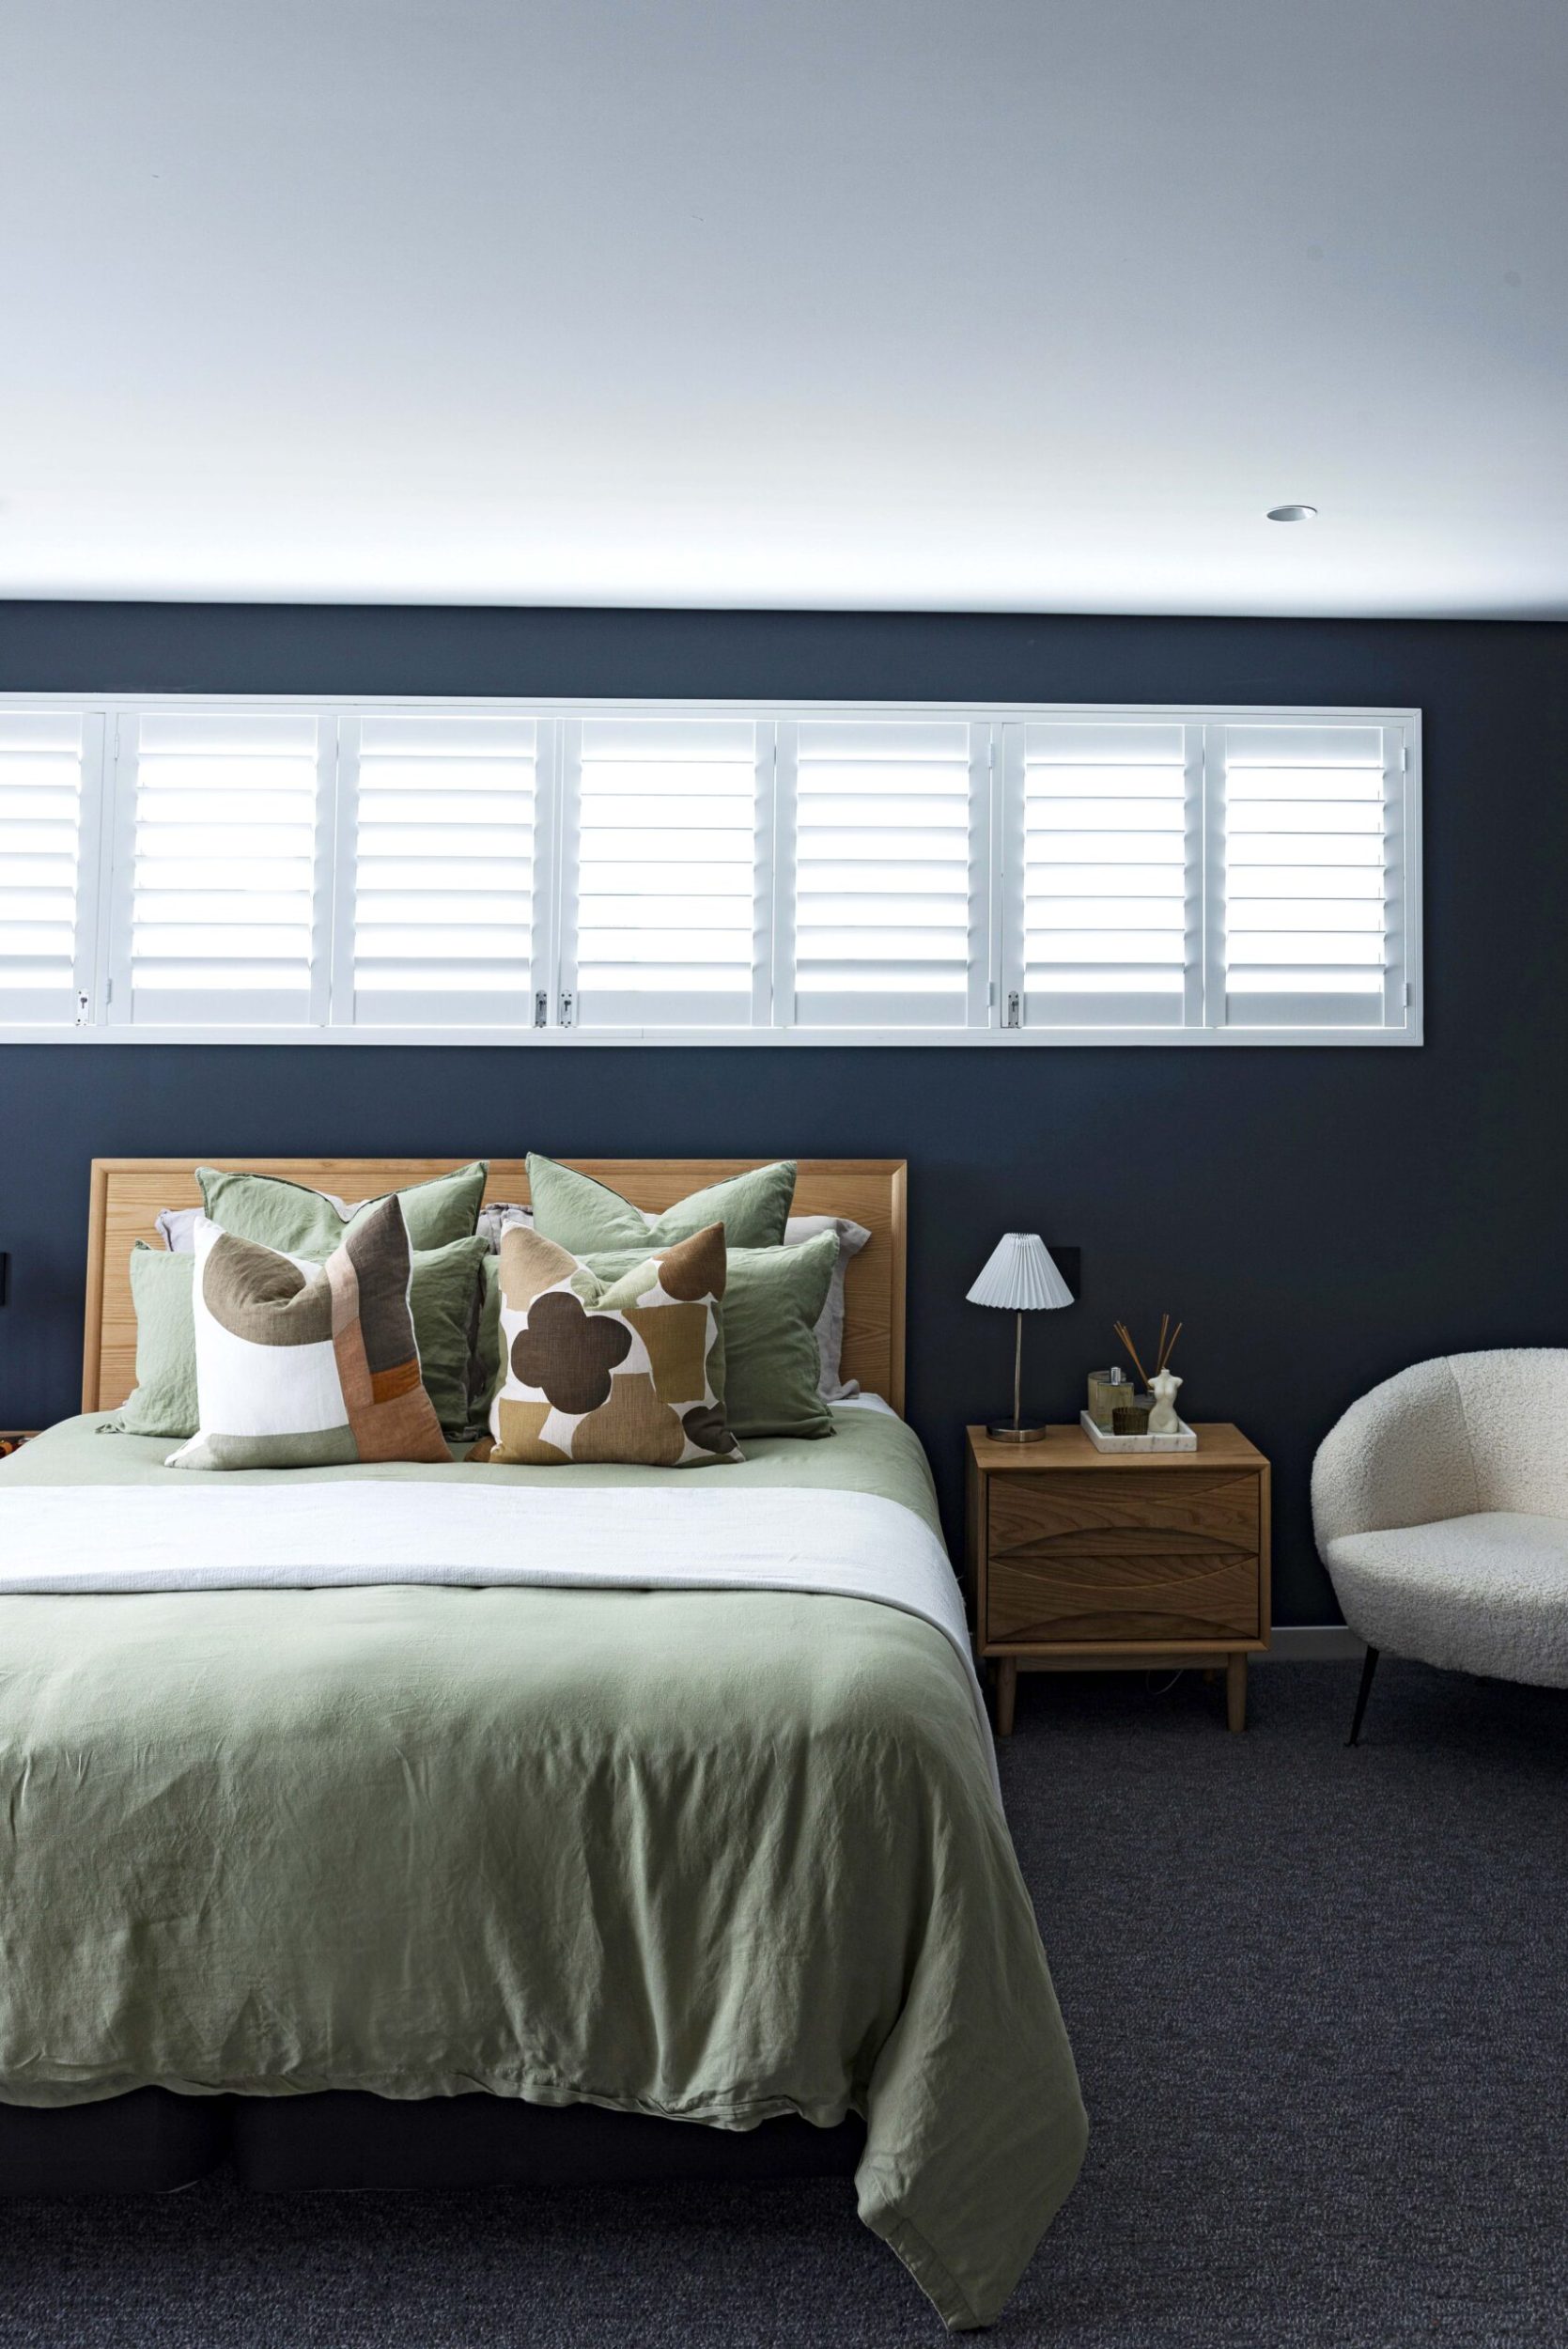 Bedroom painted in a deep blue, with shutters on the windows above the bed, and sage green coloured bed linen